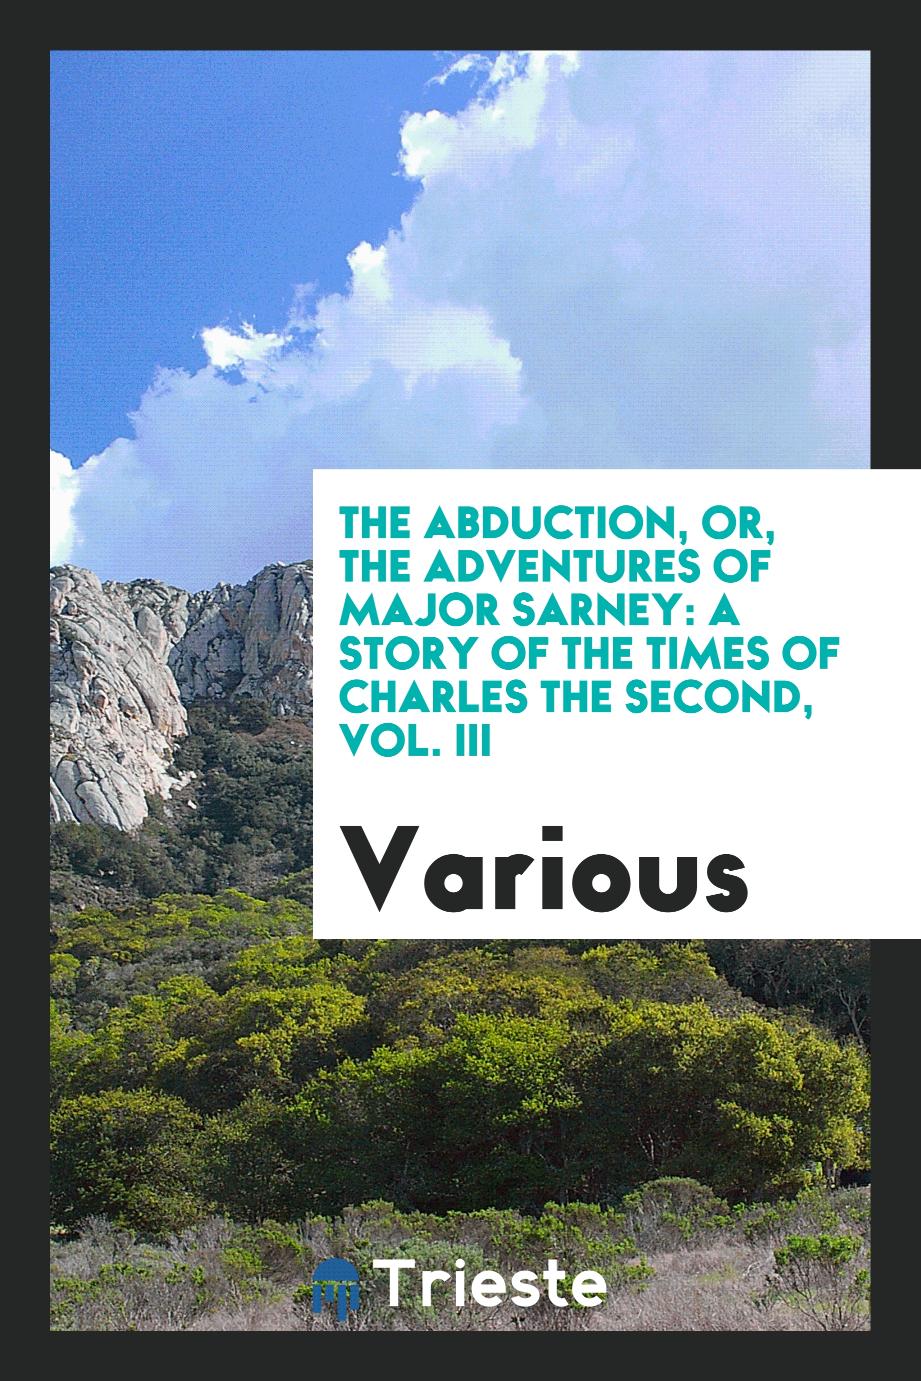 The Abduction, or, The adventures of Major Sarney: a story of the times of Charles the Second, Vol. III